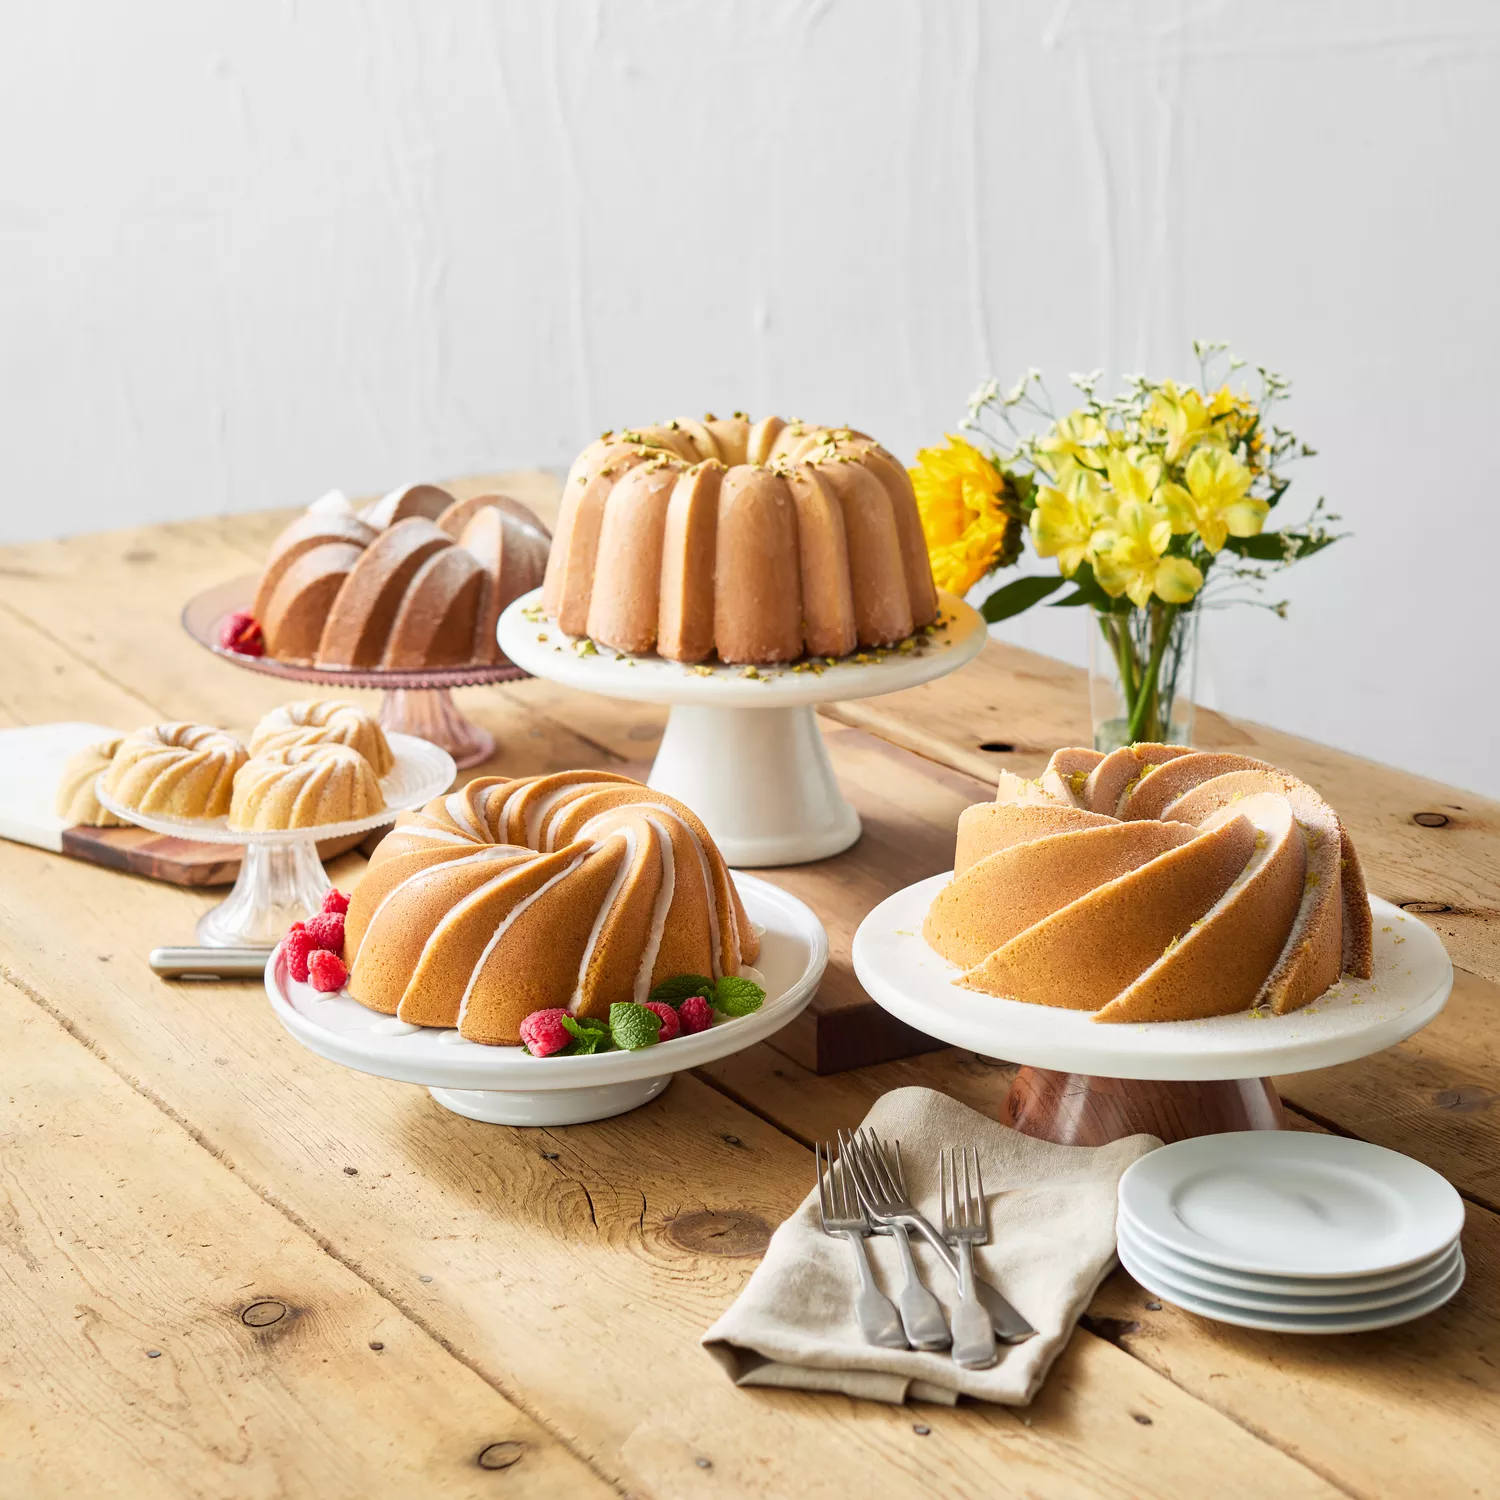 Nordic Ware 75th Anniversary Braided Bundt Pan, 12 Cups